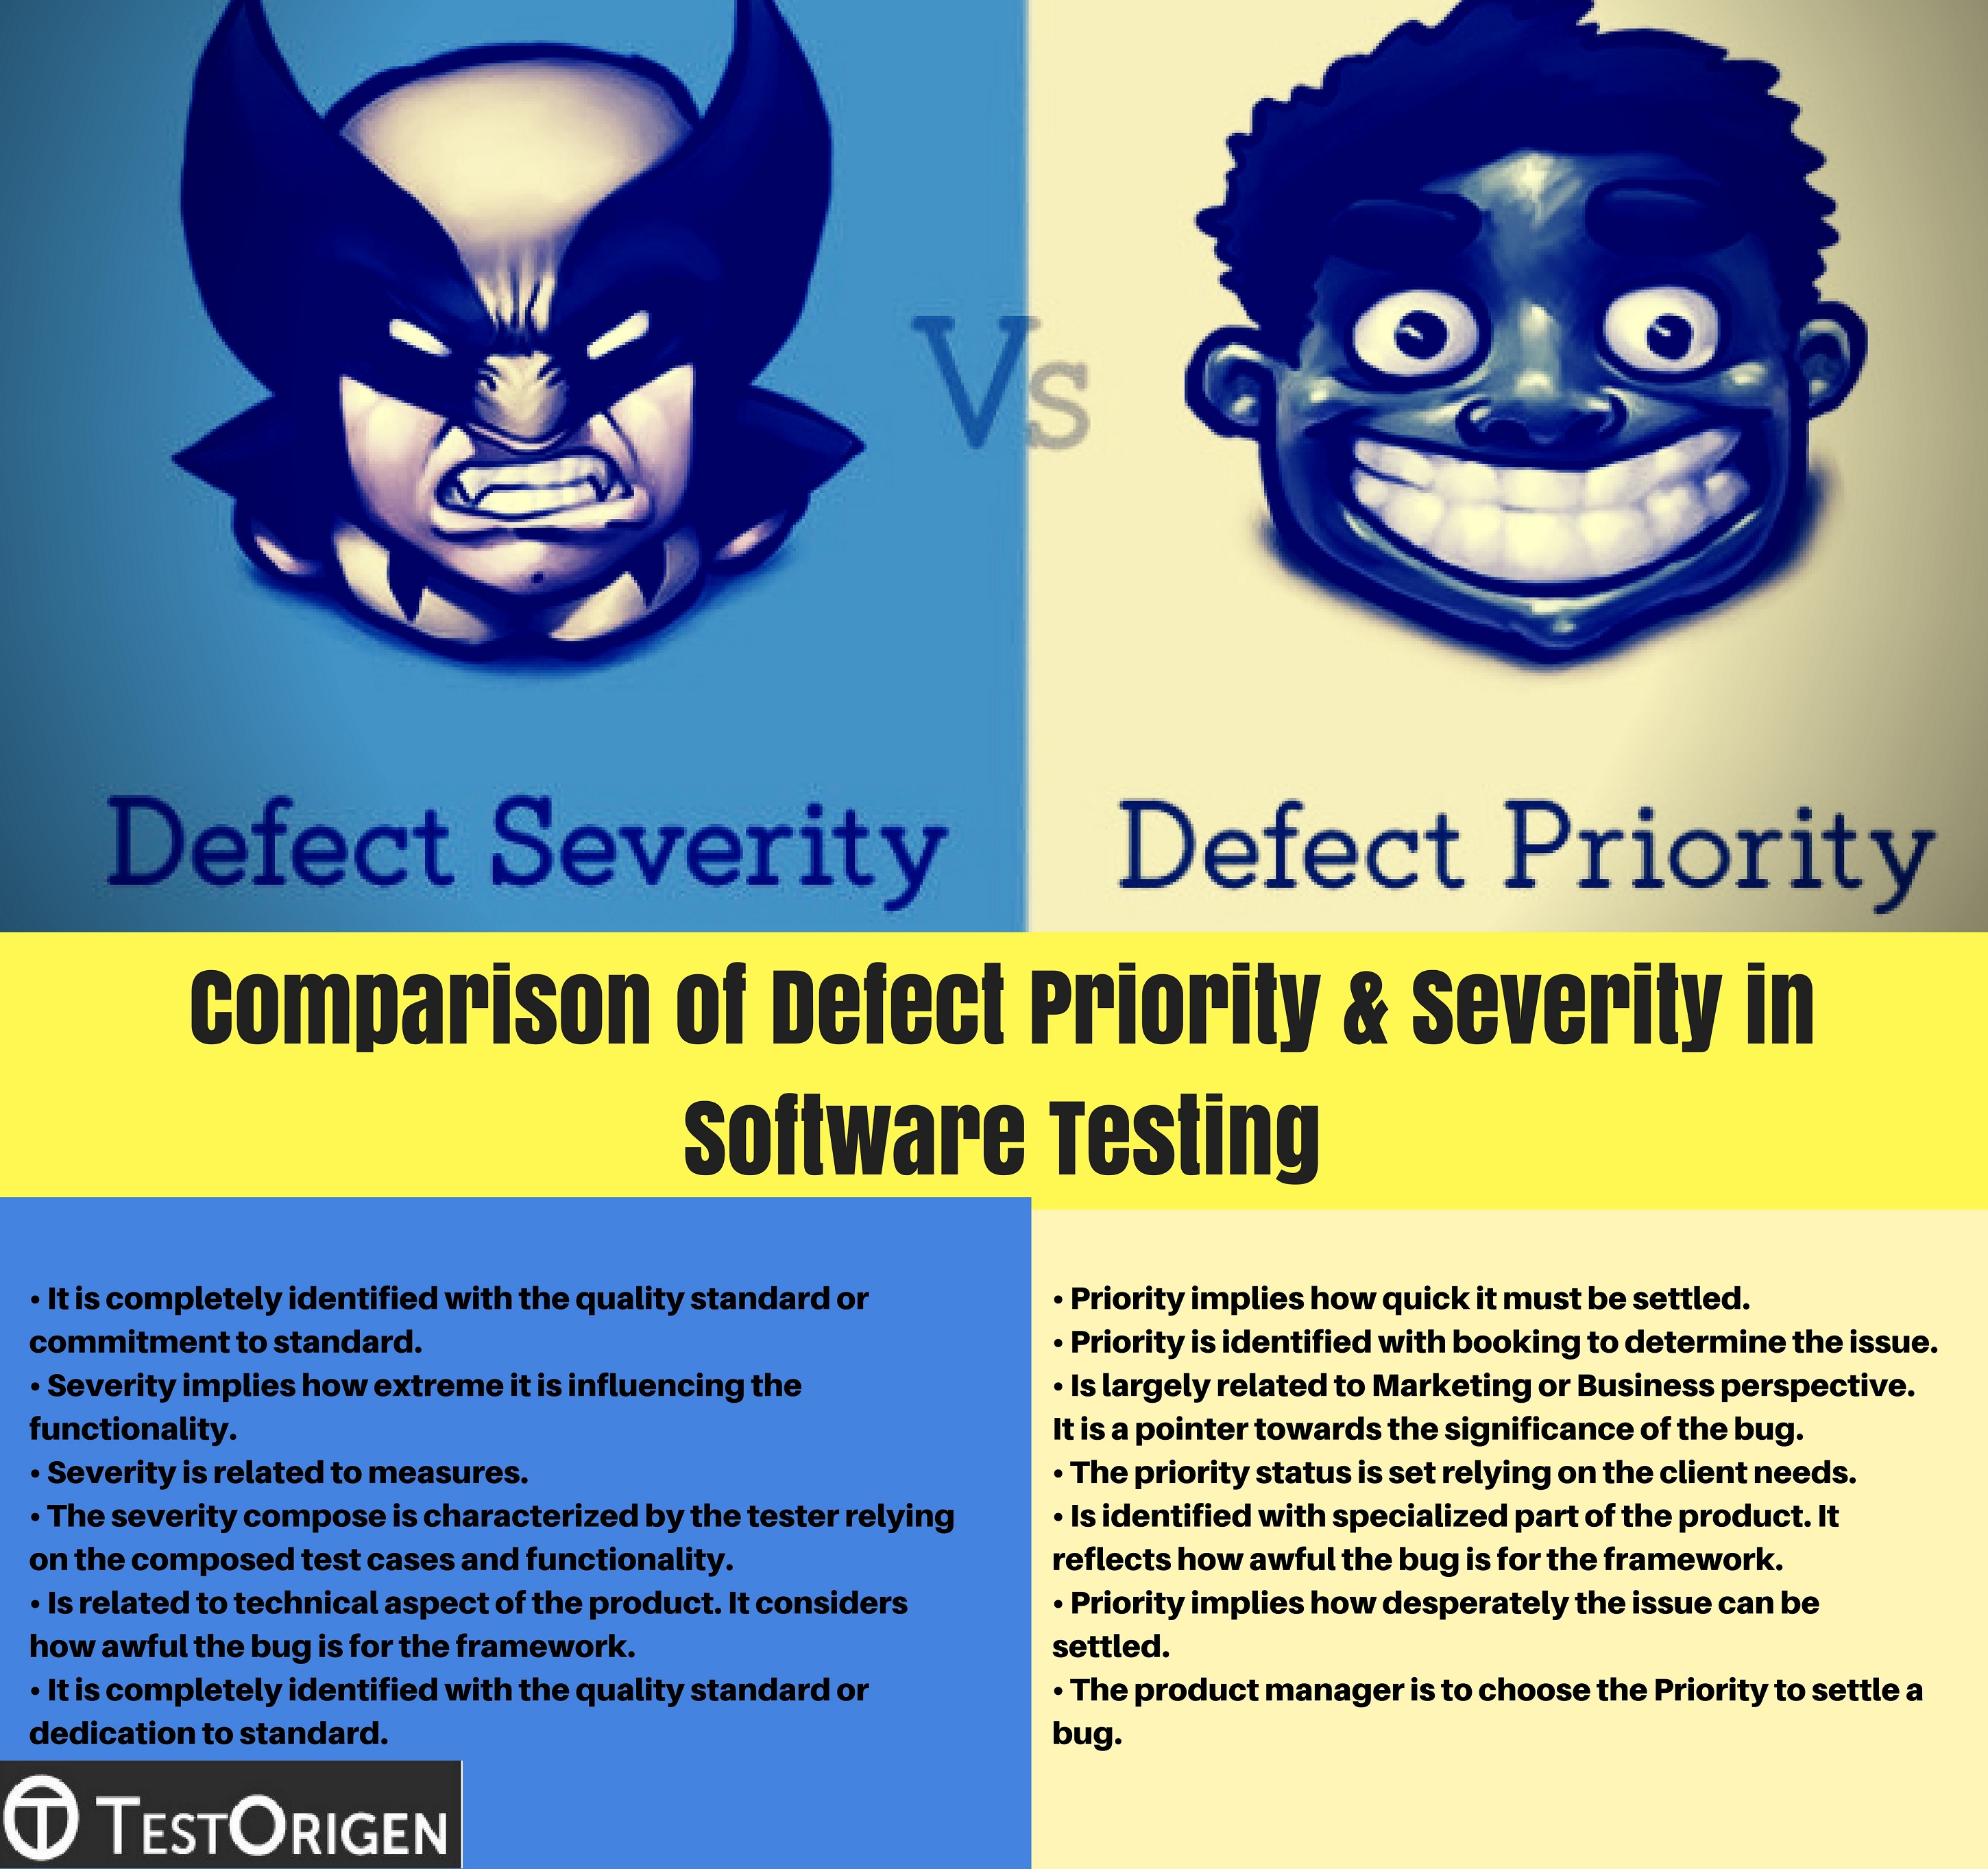 Comparison of Defect Priority & Severity in Software Testing